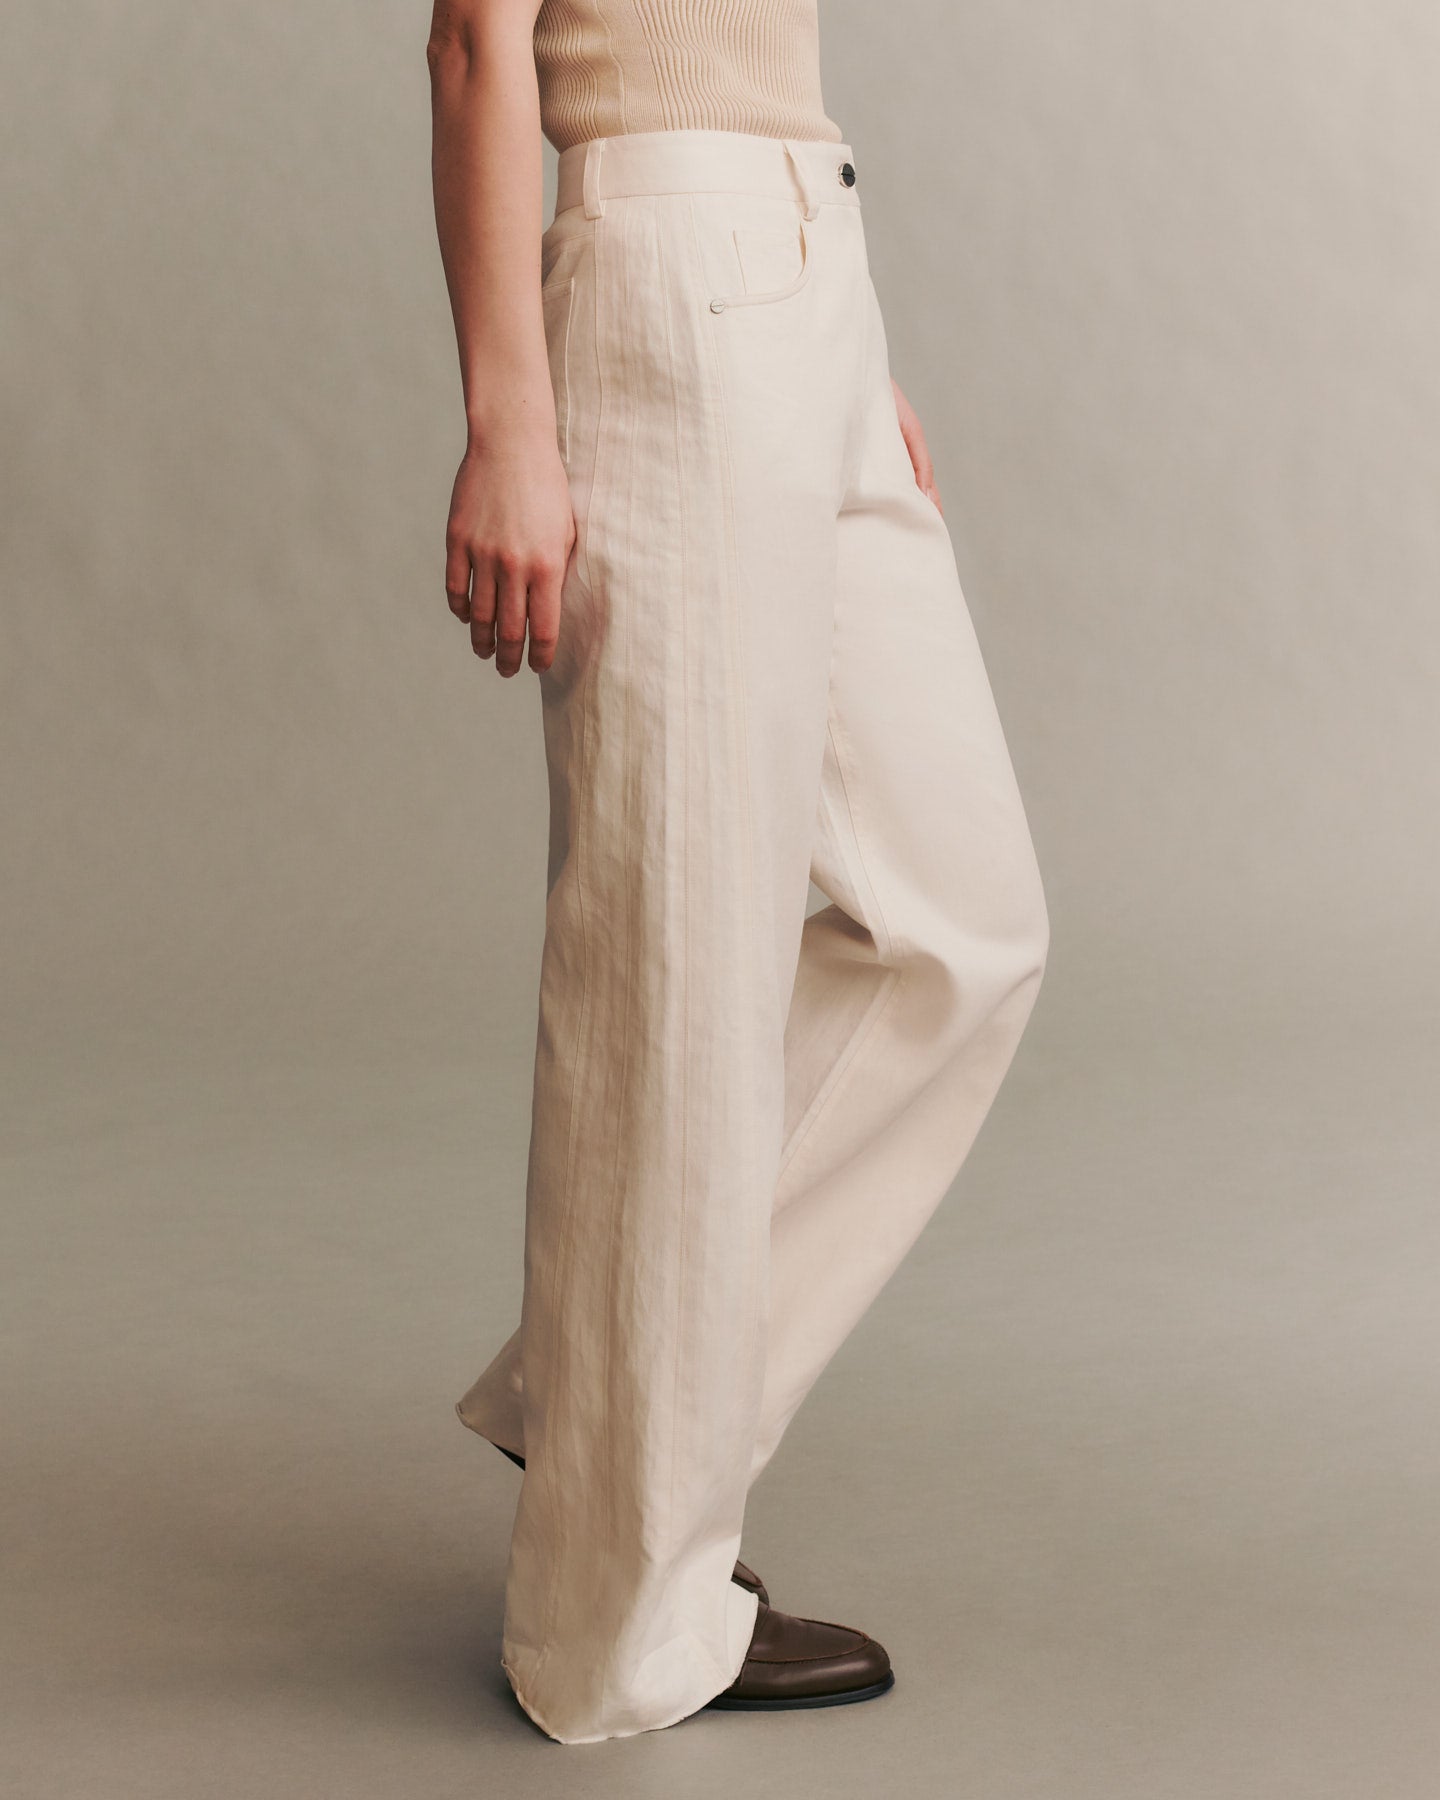 TWP Bone Puddle TWP Pant in Cotton Linen view 5